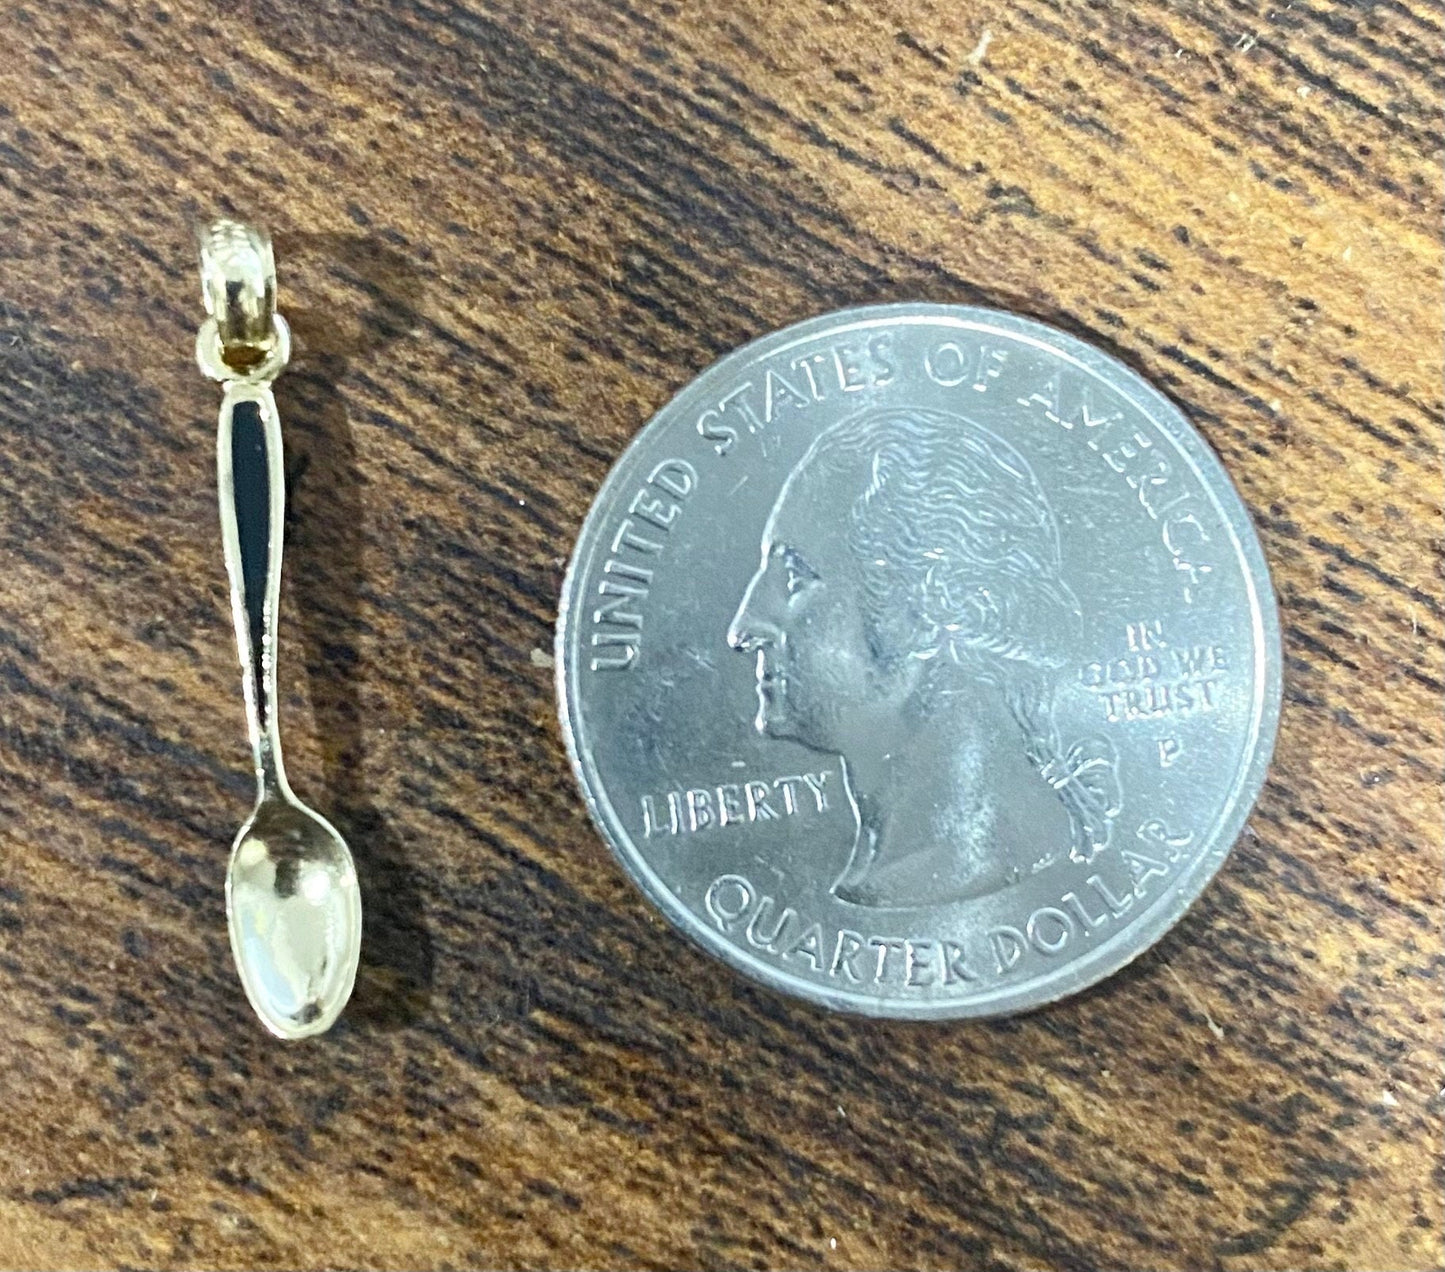 14K Solid Yellow Gold Polished Black Enamel 3-D Table Spoon Charm Pendant Charm .8" Long x 4mm Wide. Great 4 Necklace / Charm Bracelet